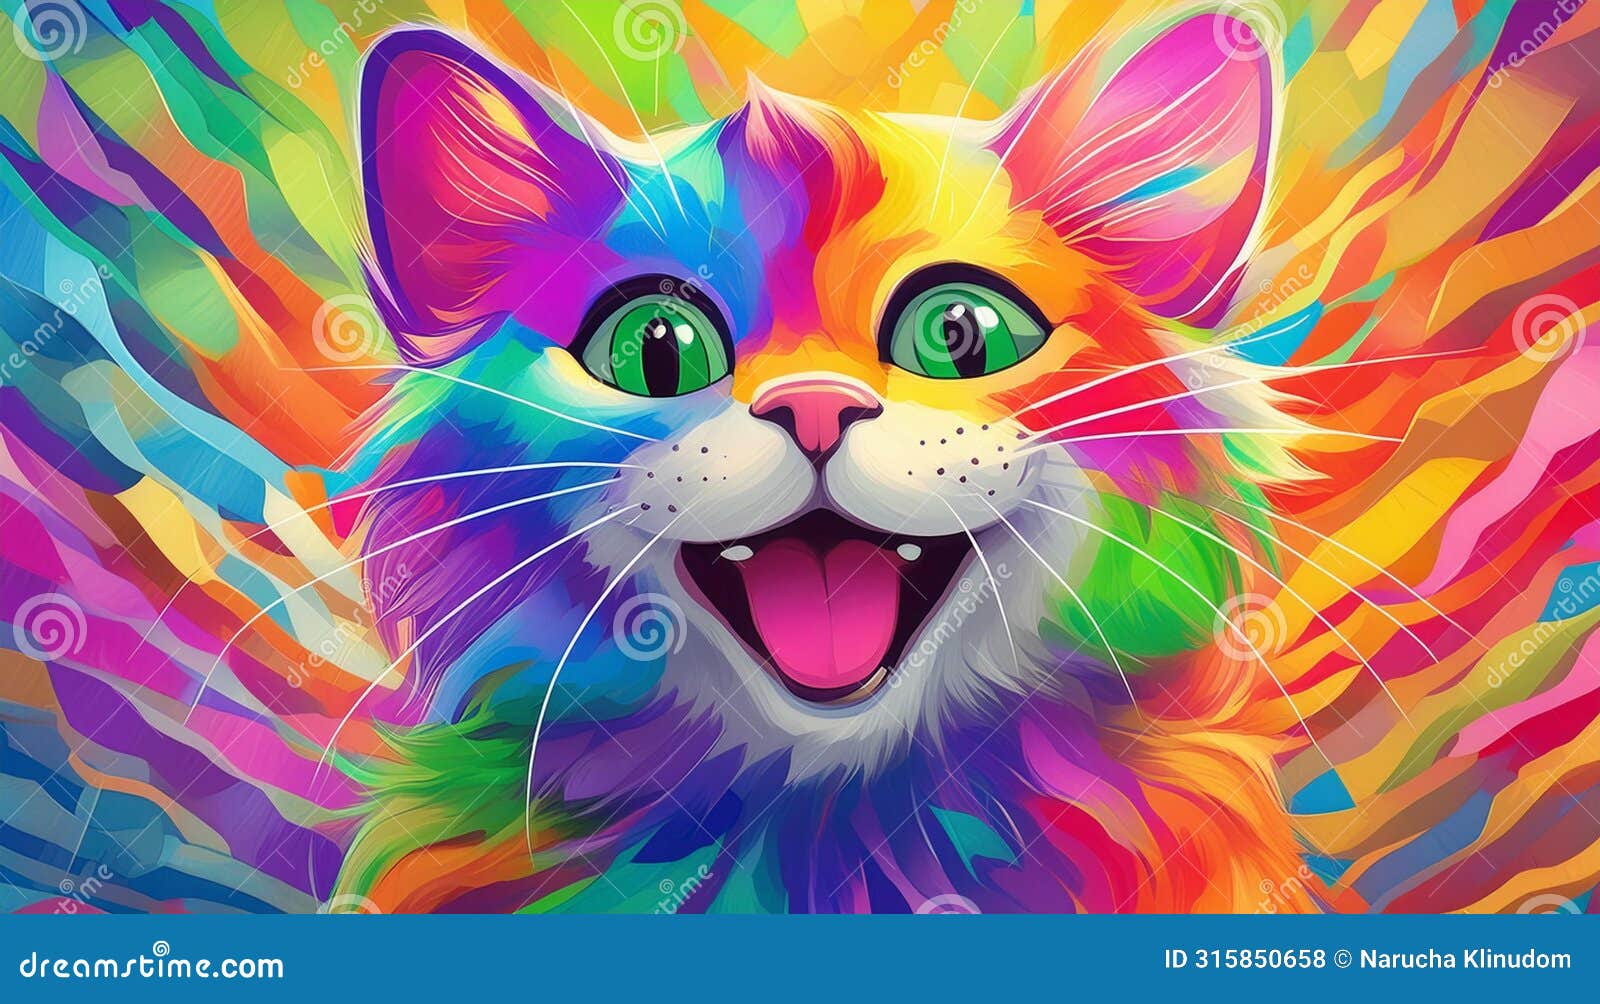 the colorful funny cat background